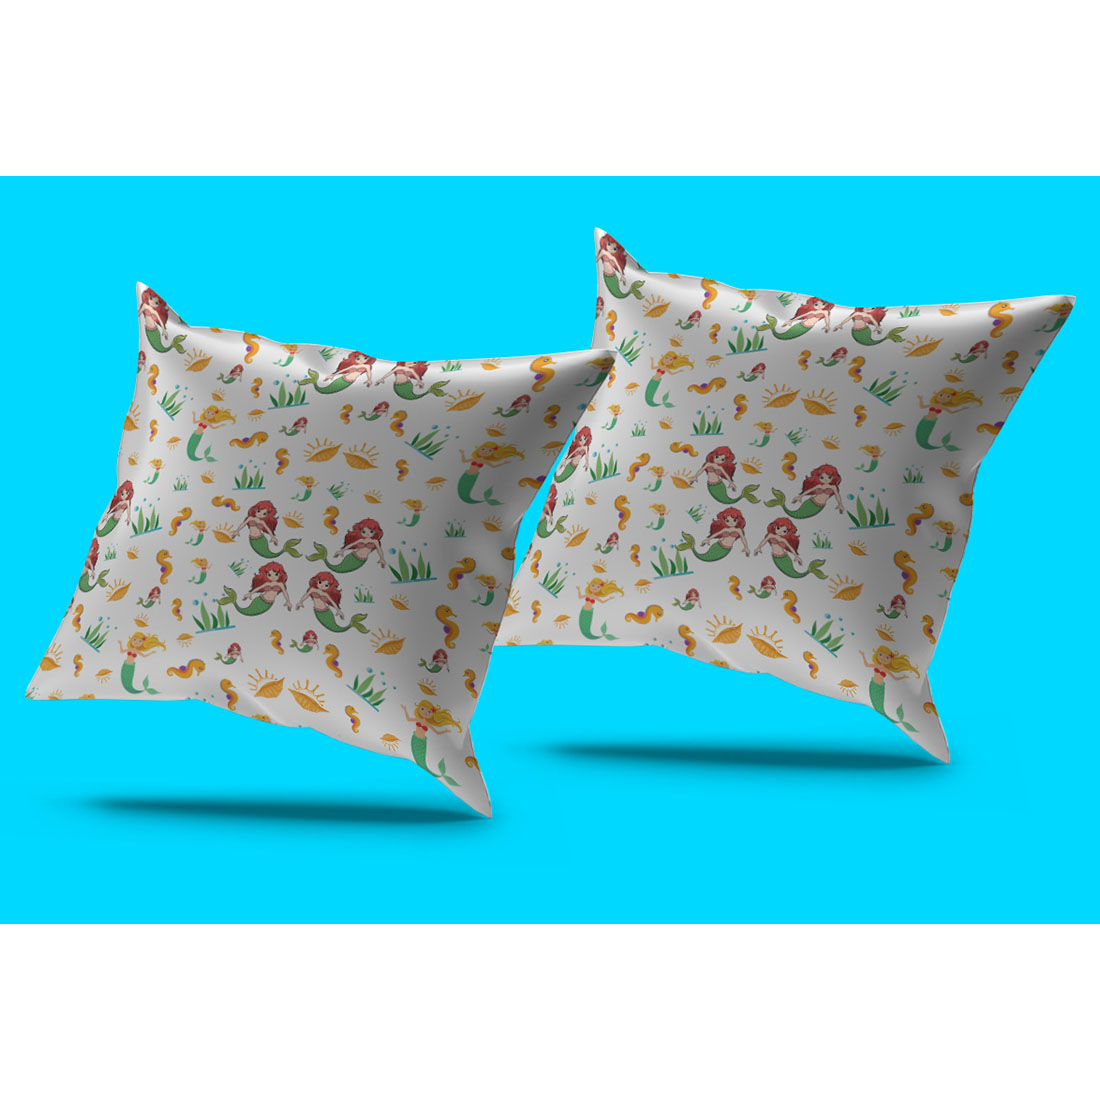 Image of pillows with colorful patterns with little mermaids